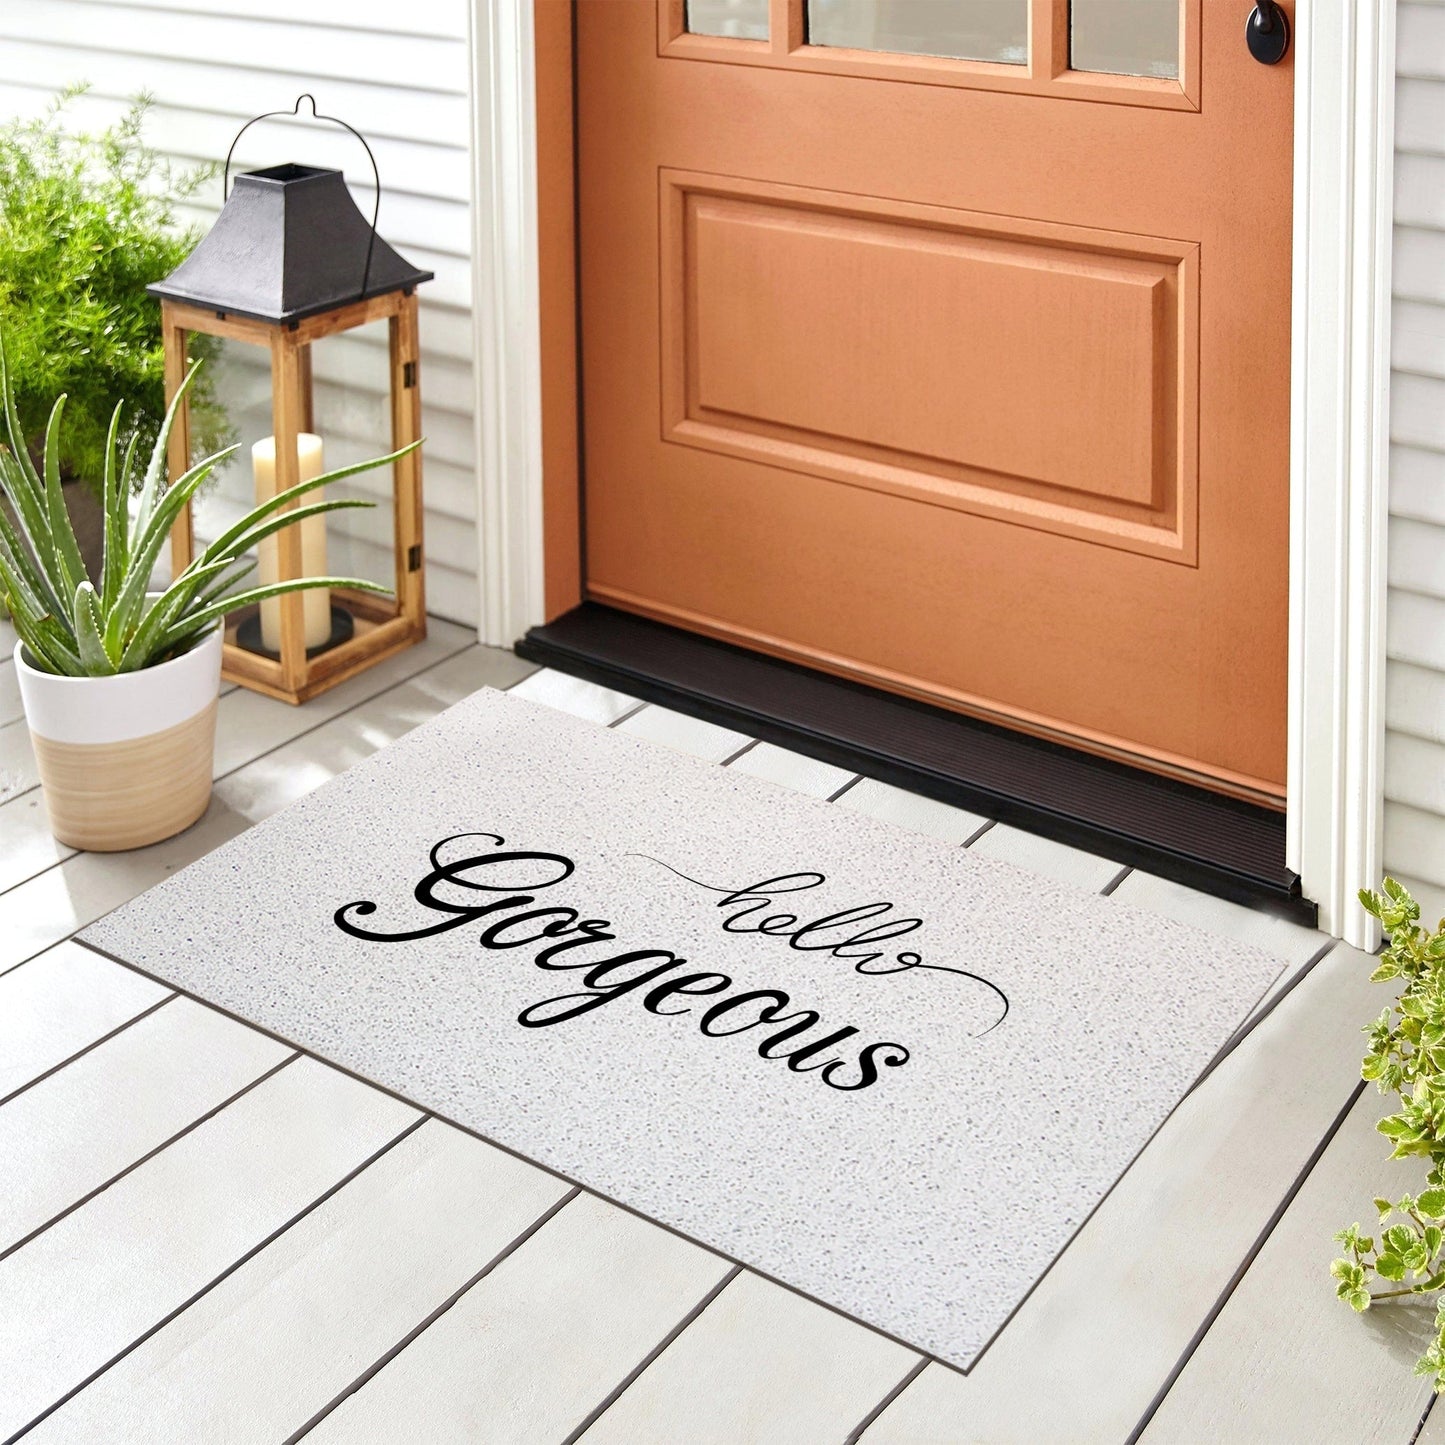 Feblilac Hello Gorgeous White Ground Door mat, Quotation Welcome Doormat, Anti Skid PVC Coil Outdoor Mats, Front Mat for Home, Washable Entryway Doormat